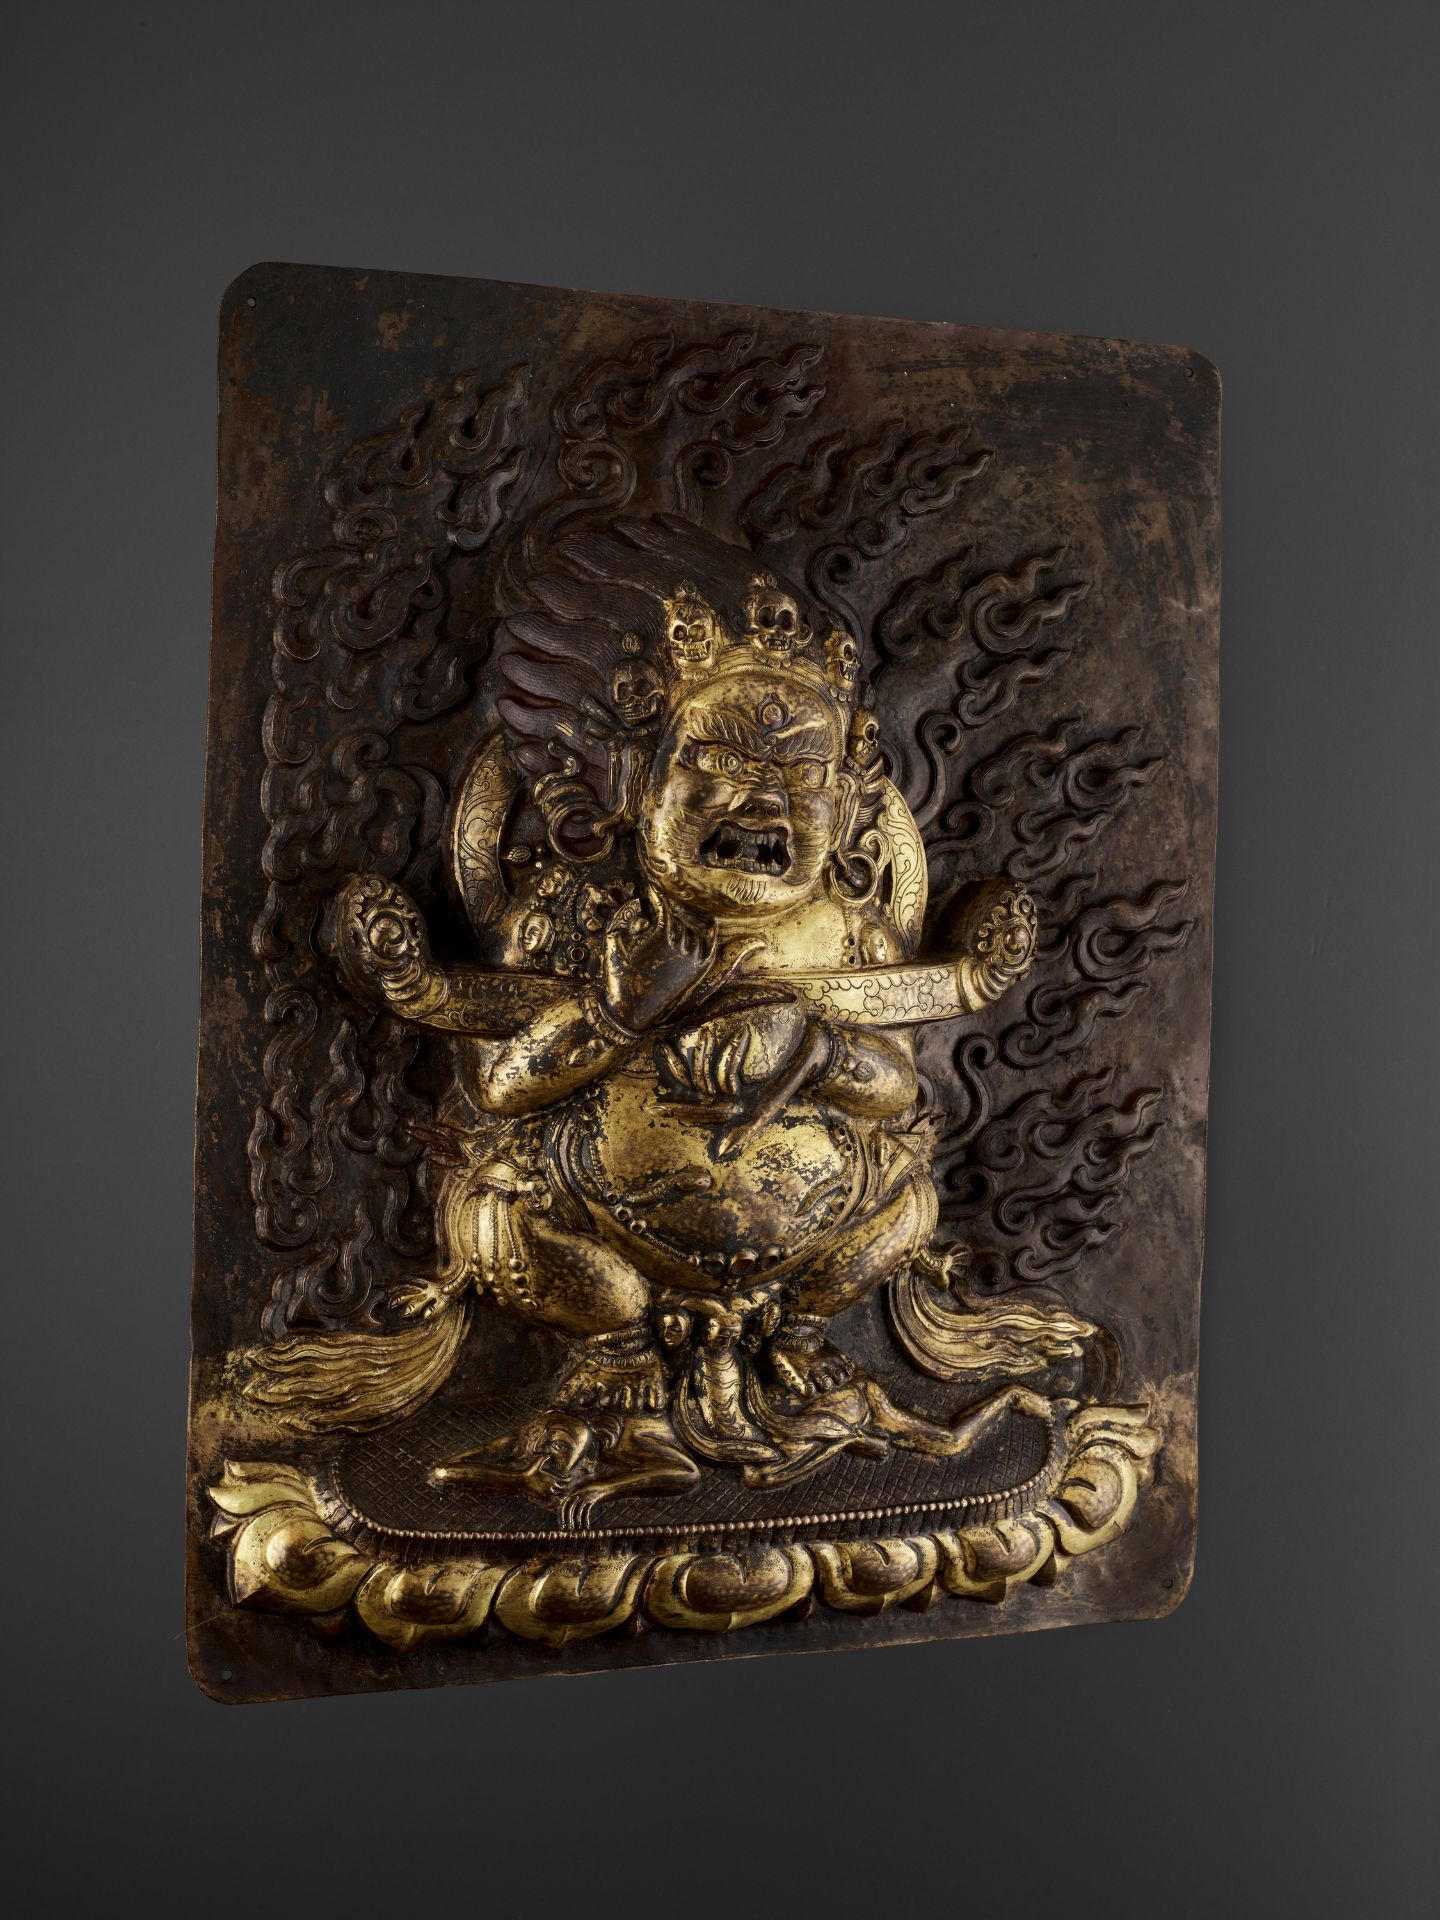 A LARGE GILT-COPPER REPOUSSE RELIEF OF MAHAKALA, 18TH-19TH CENTURY - Image 7 of 8